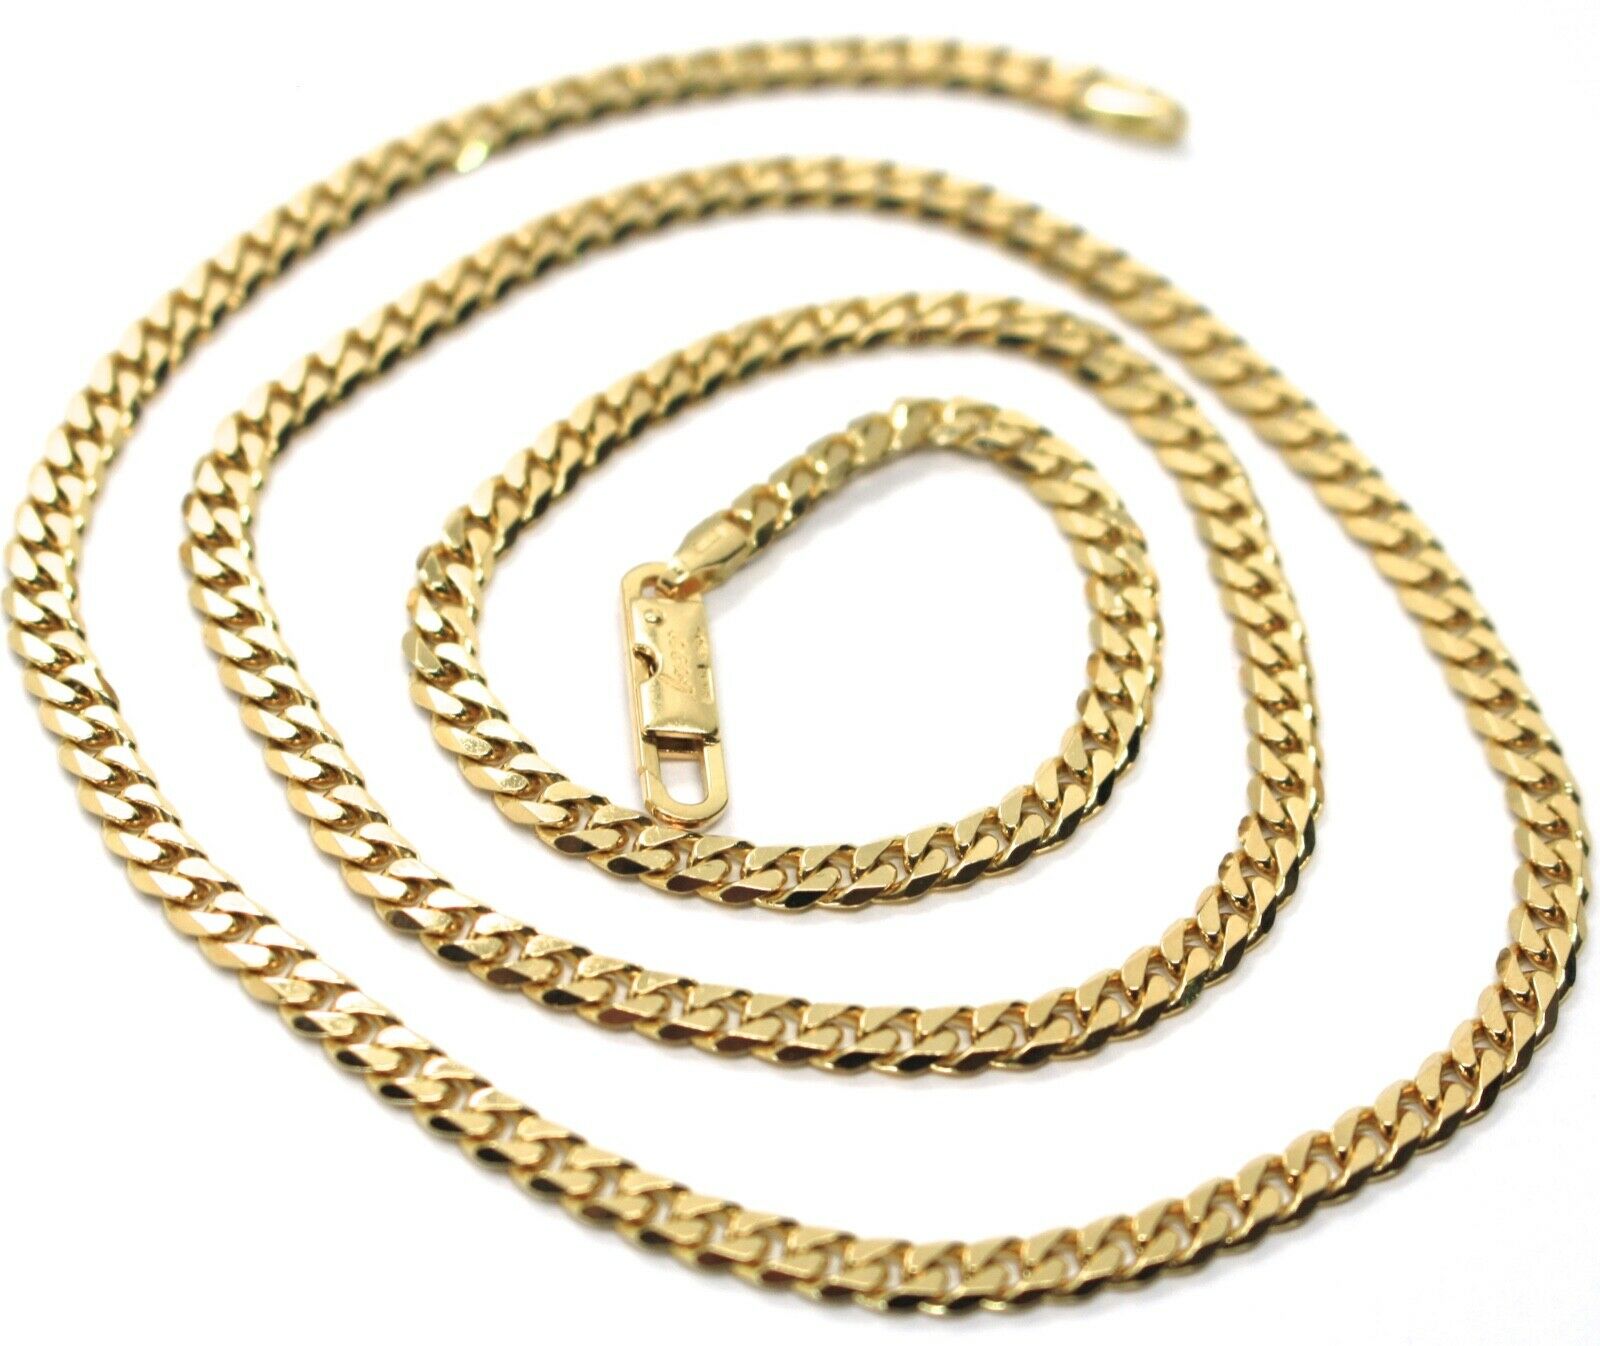 MASSIVE 18K GOLD GOURMETTE CUBAN CURB CHAIN 3.5 MM 18 IN. NECKLACE MADE IN  ITALY